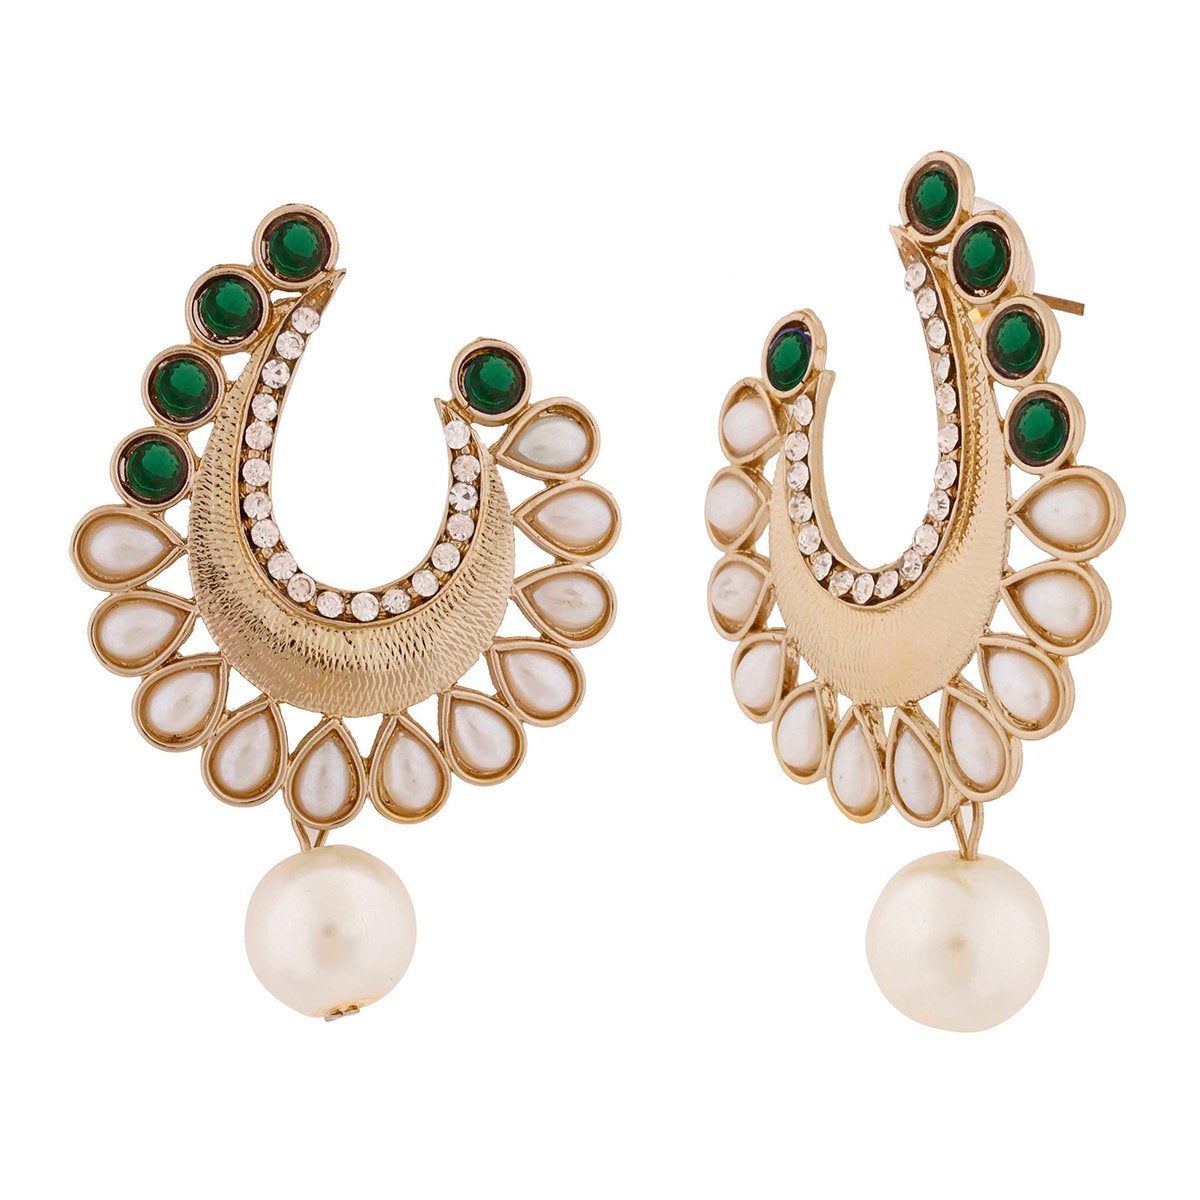 Crescent Antique Rhodium Green Cz Pearl Earring For Women